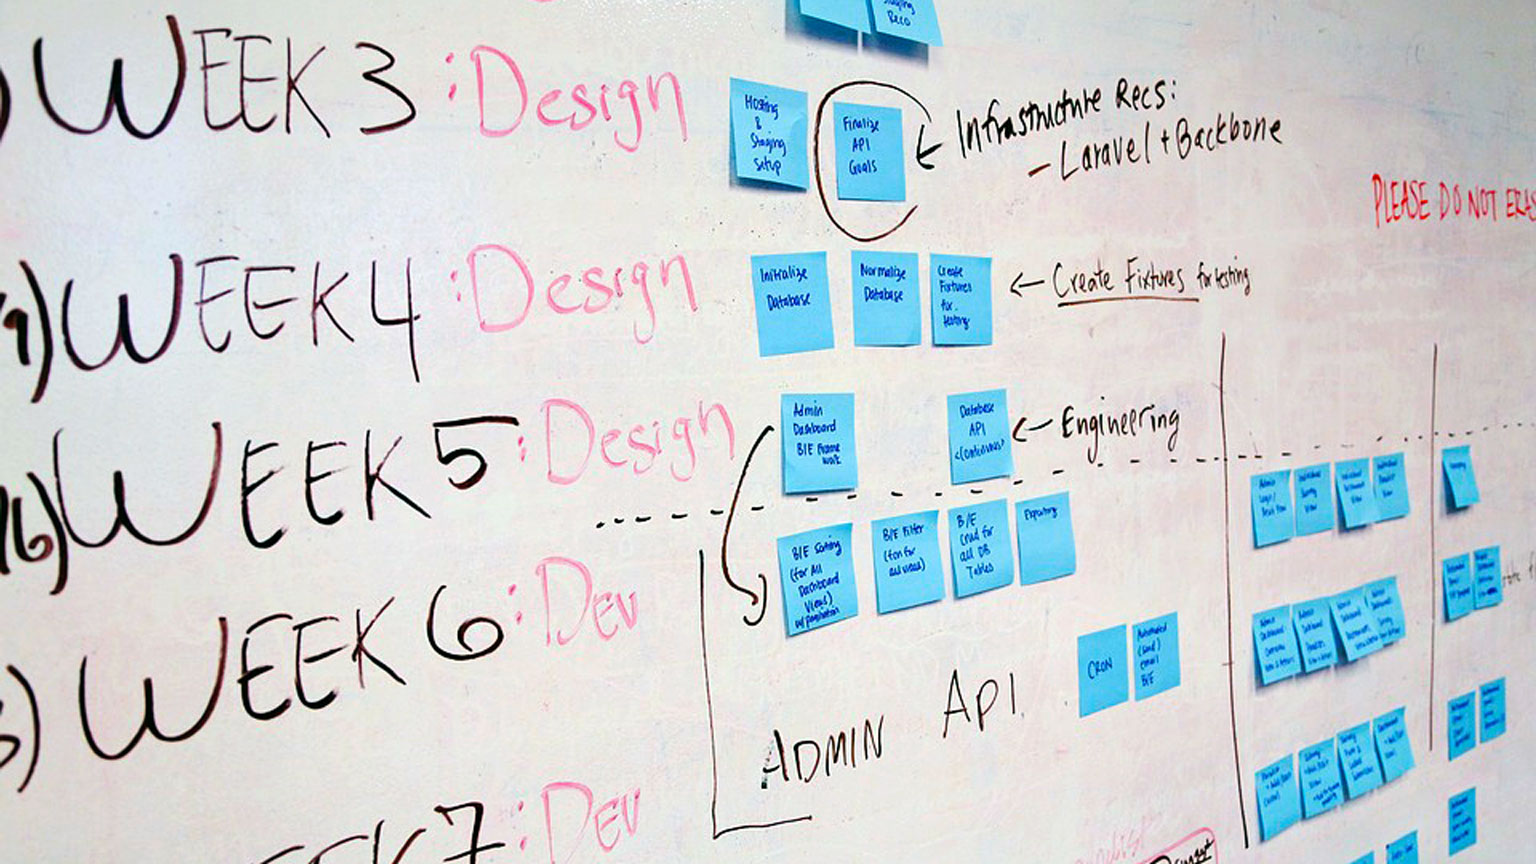 Whiteboard is covered by lines of post-it notes showing the timeline of a product's development.